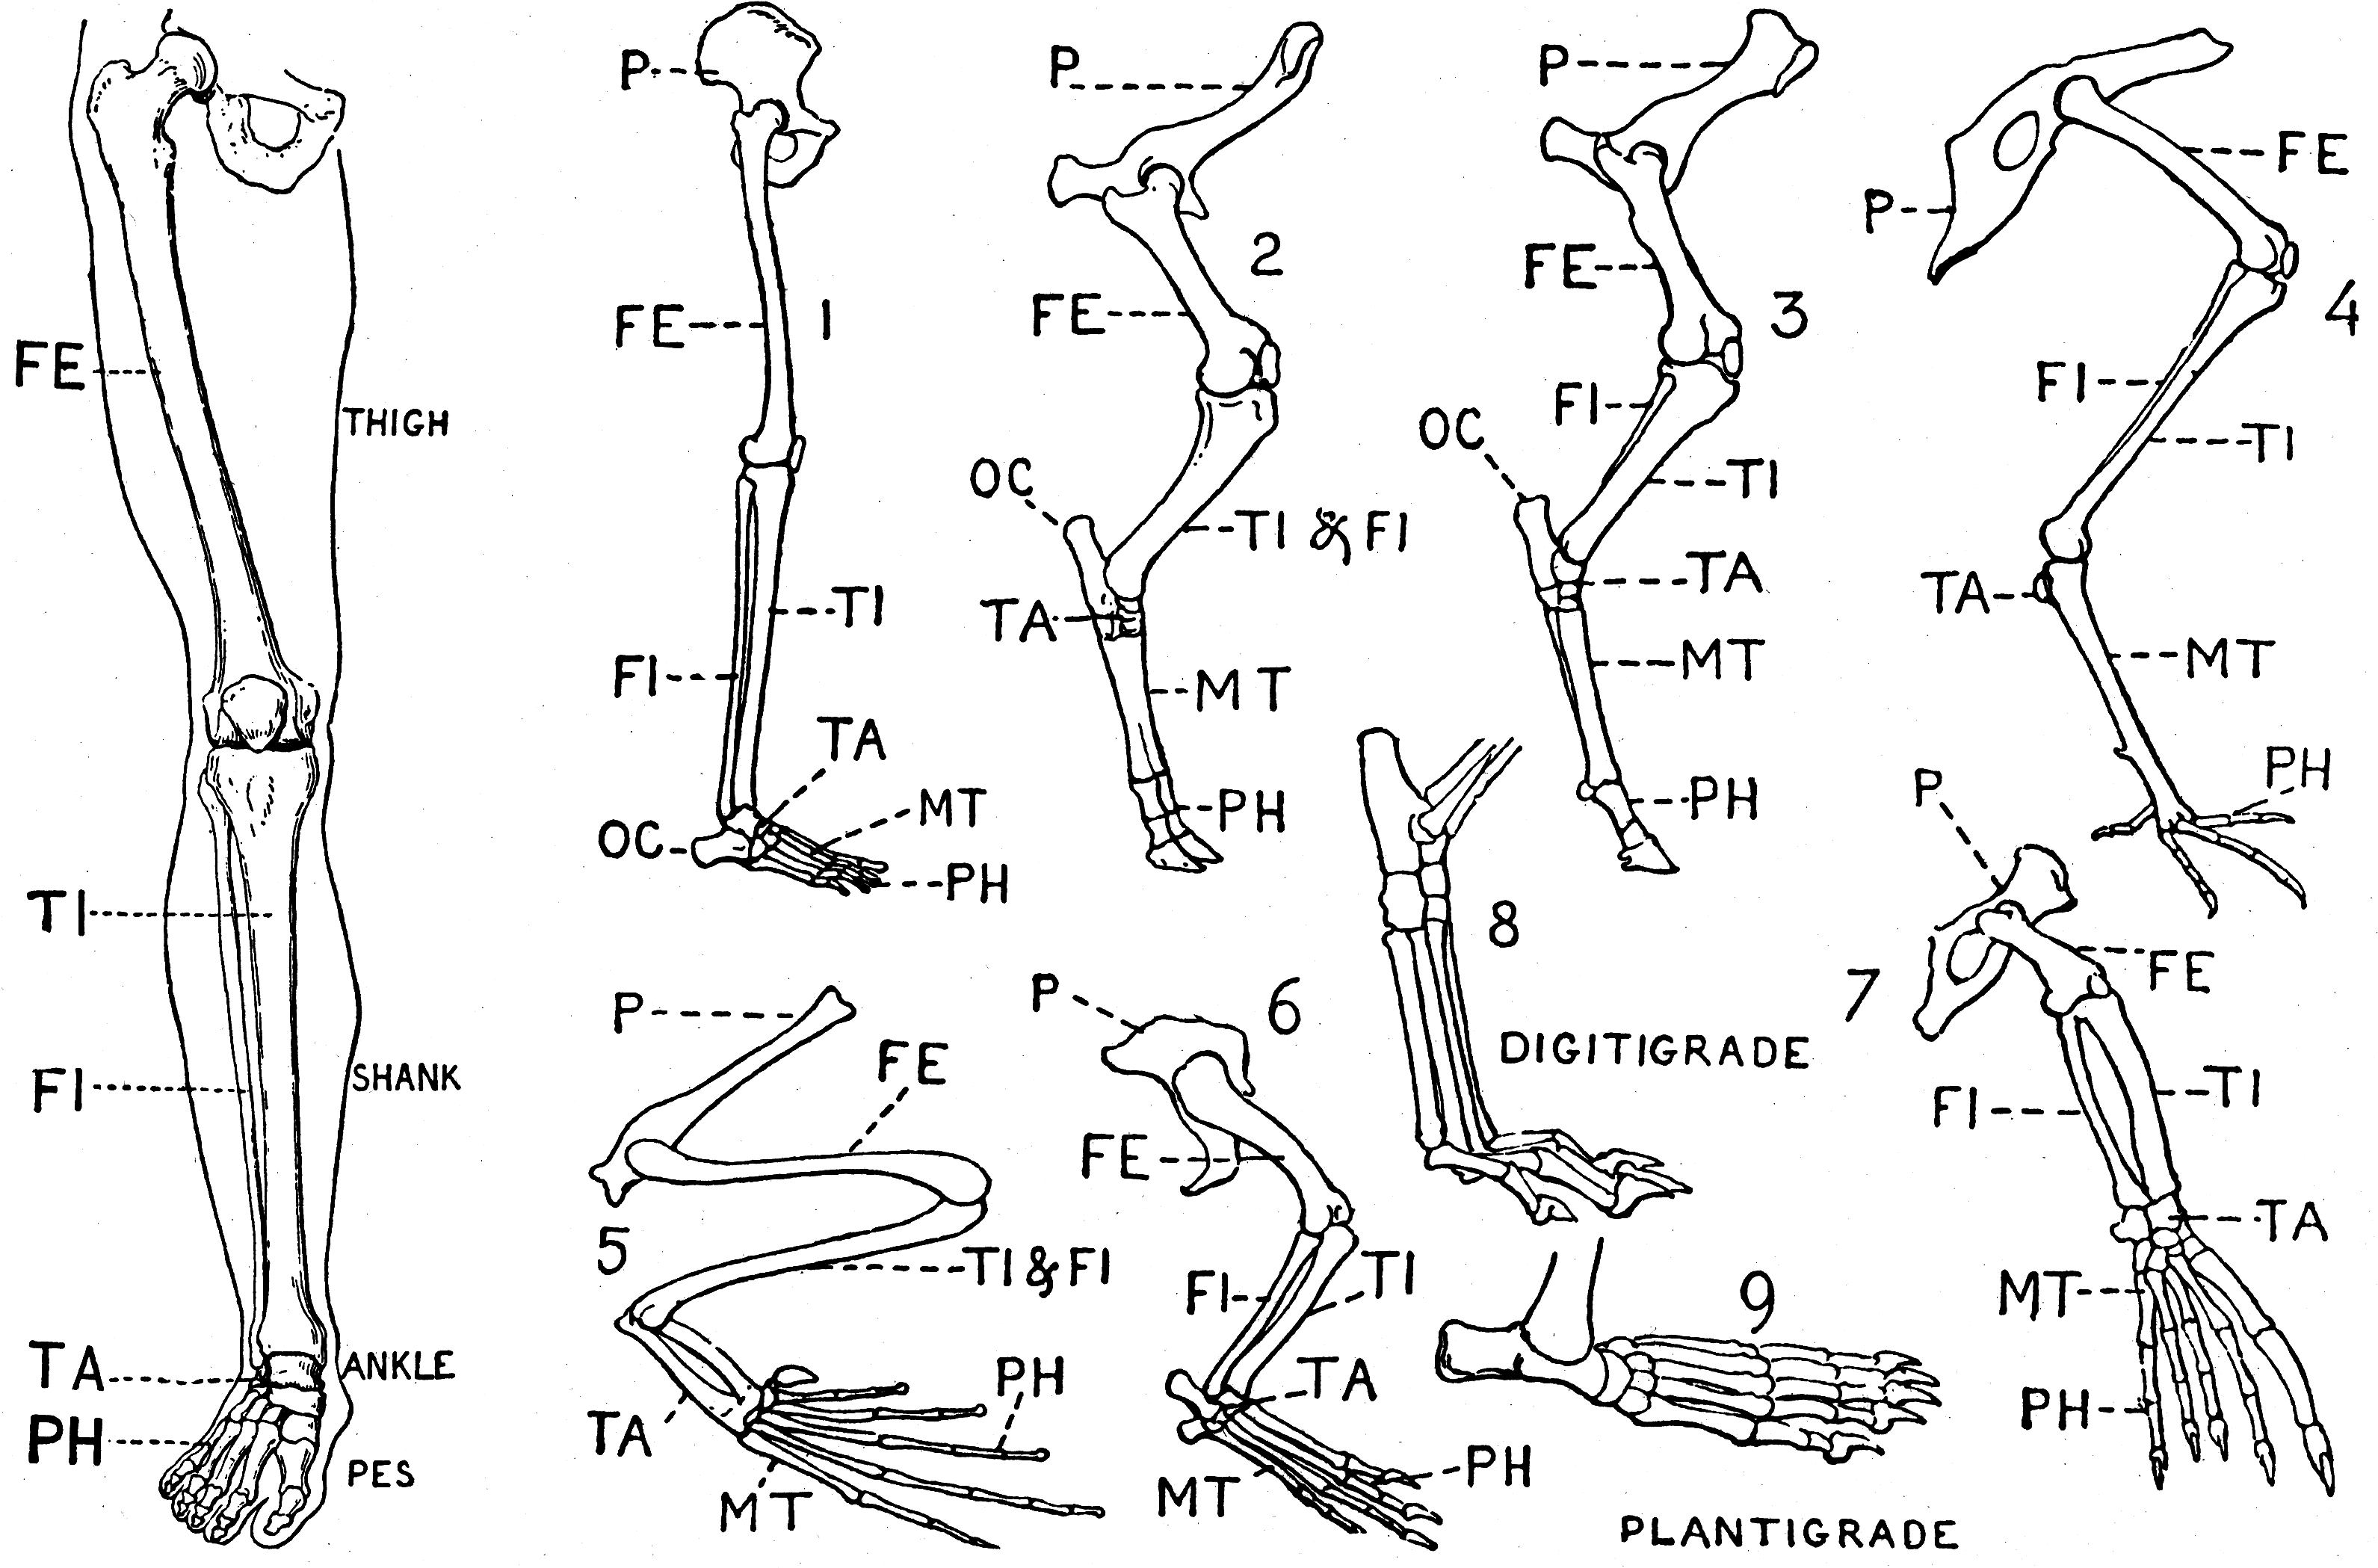 Human Leg (Front View), and Comparative Diagrams showing Modifications